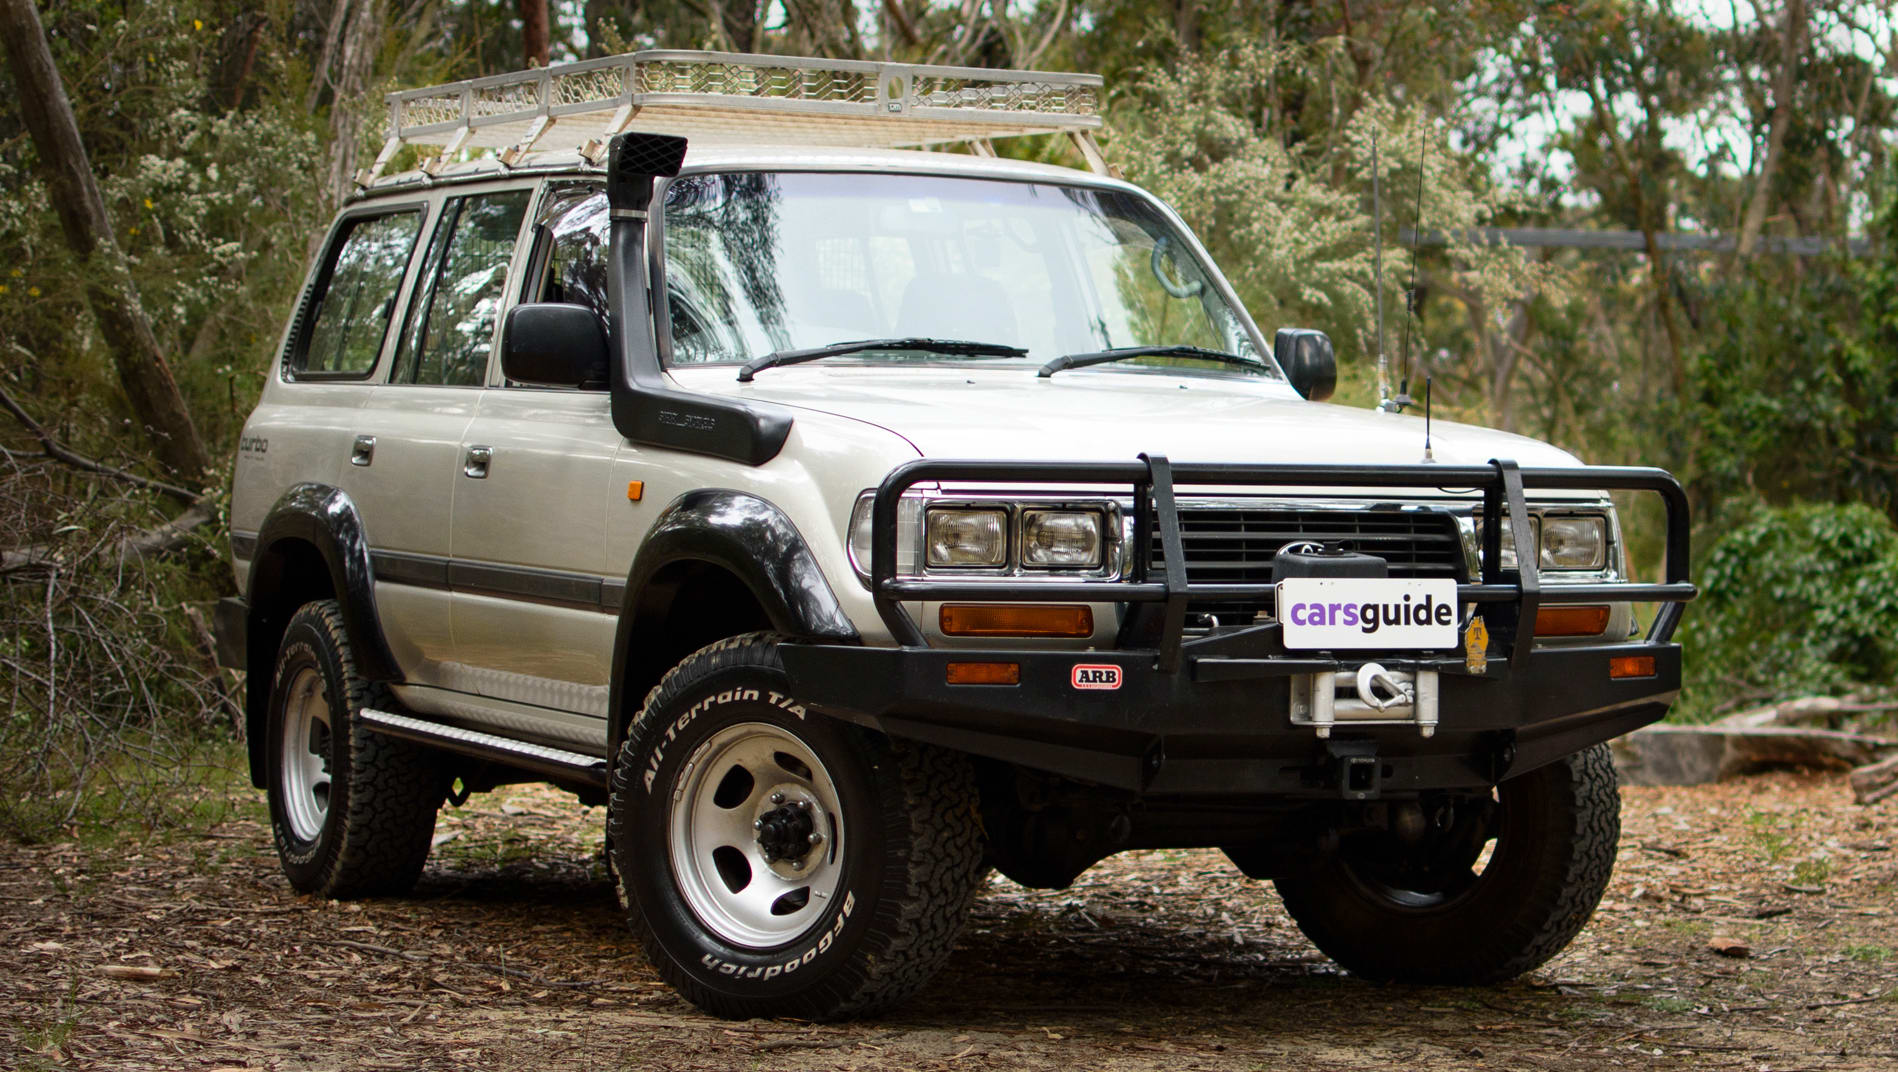 80 Series Landcruiser Used Review 1990 1998